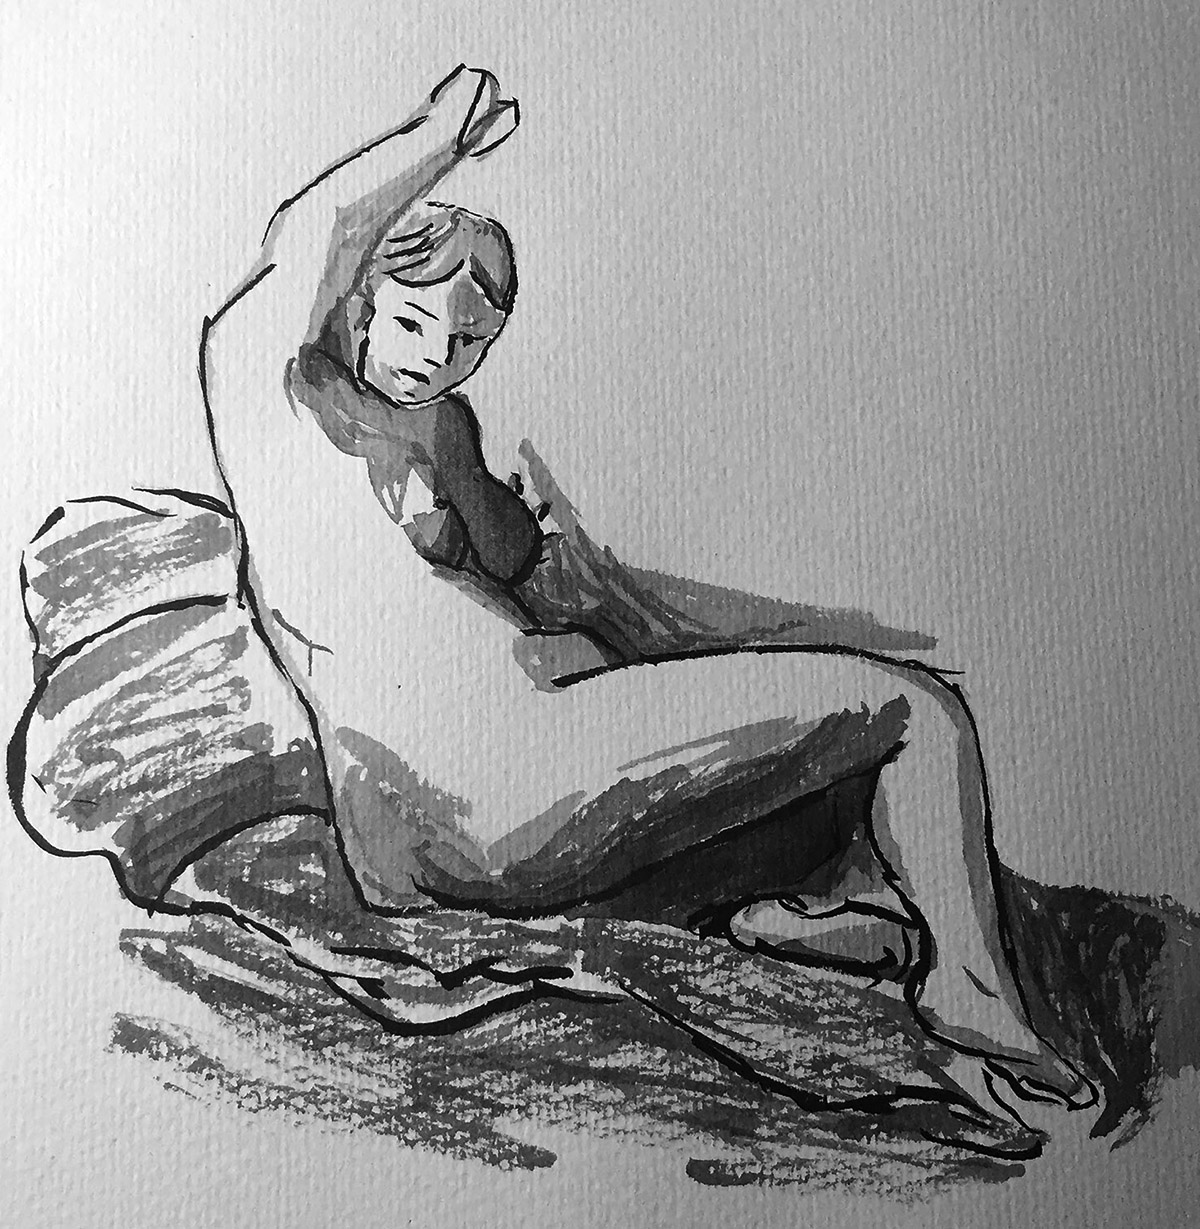 India Ink Drawing of a Nude Woman with Her Arm Raised